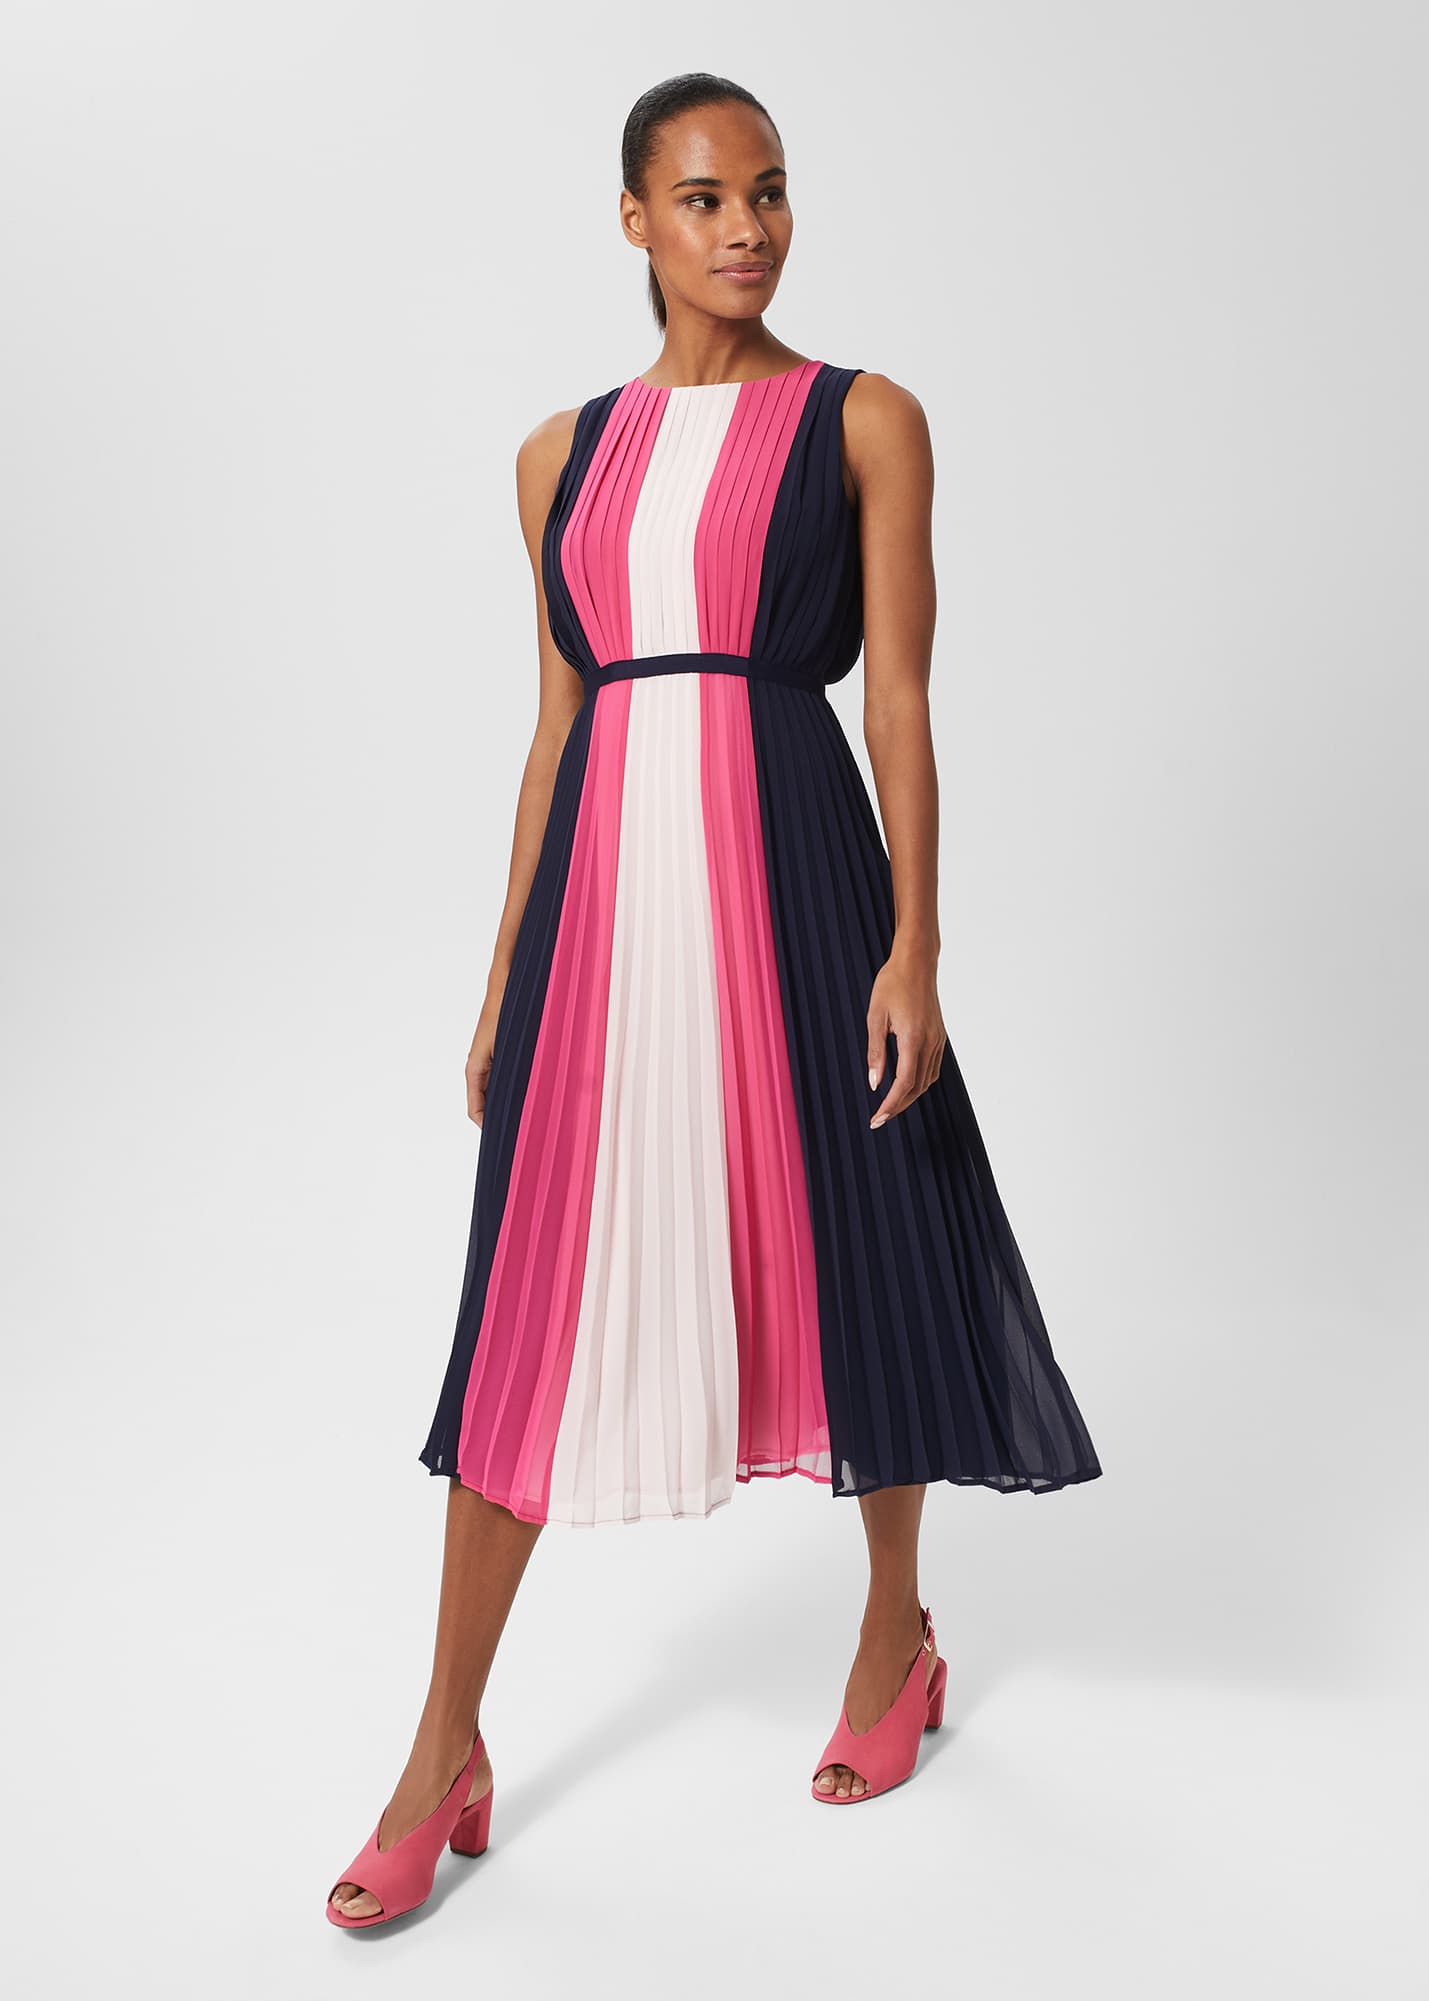 Hobbs Women's Claudia Pleated Fit And Flare Dress - Navy Pink Multi